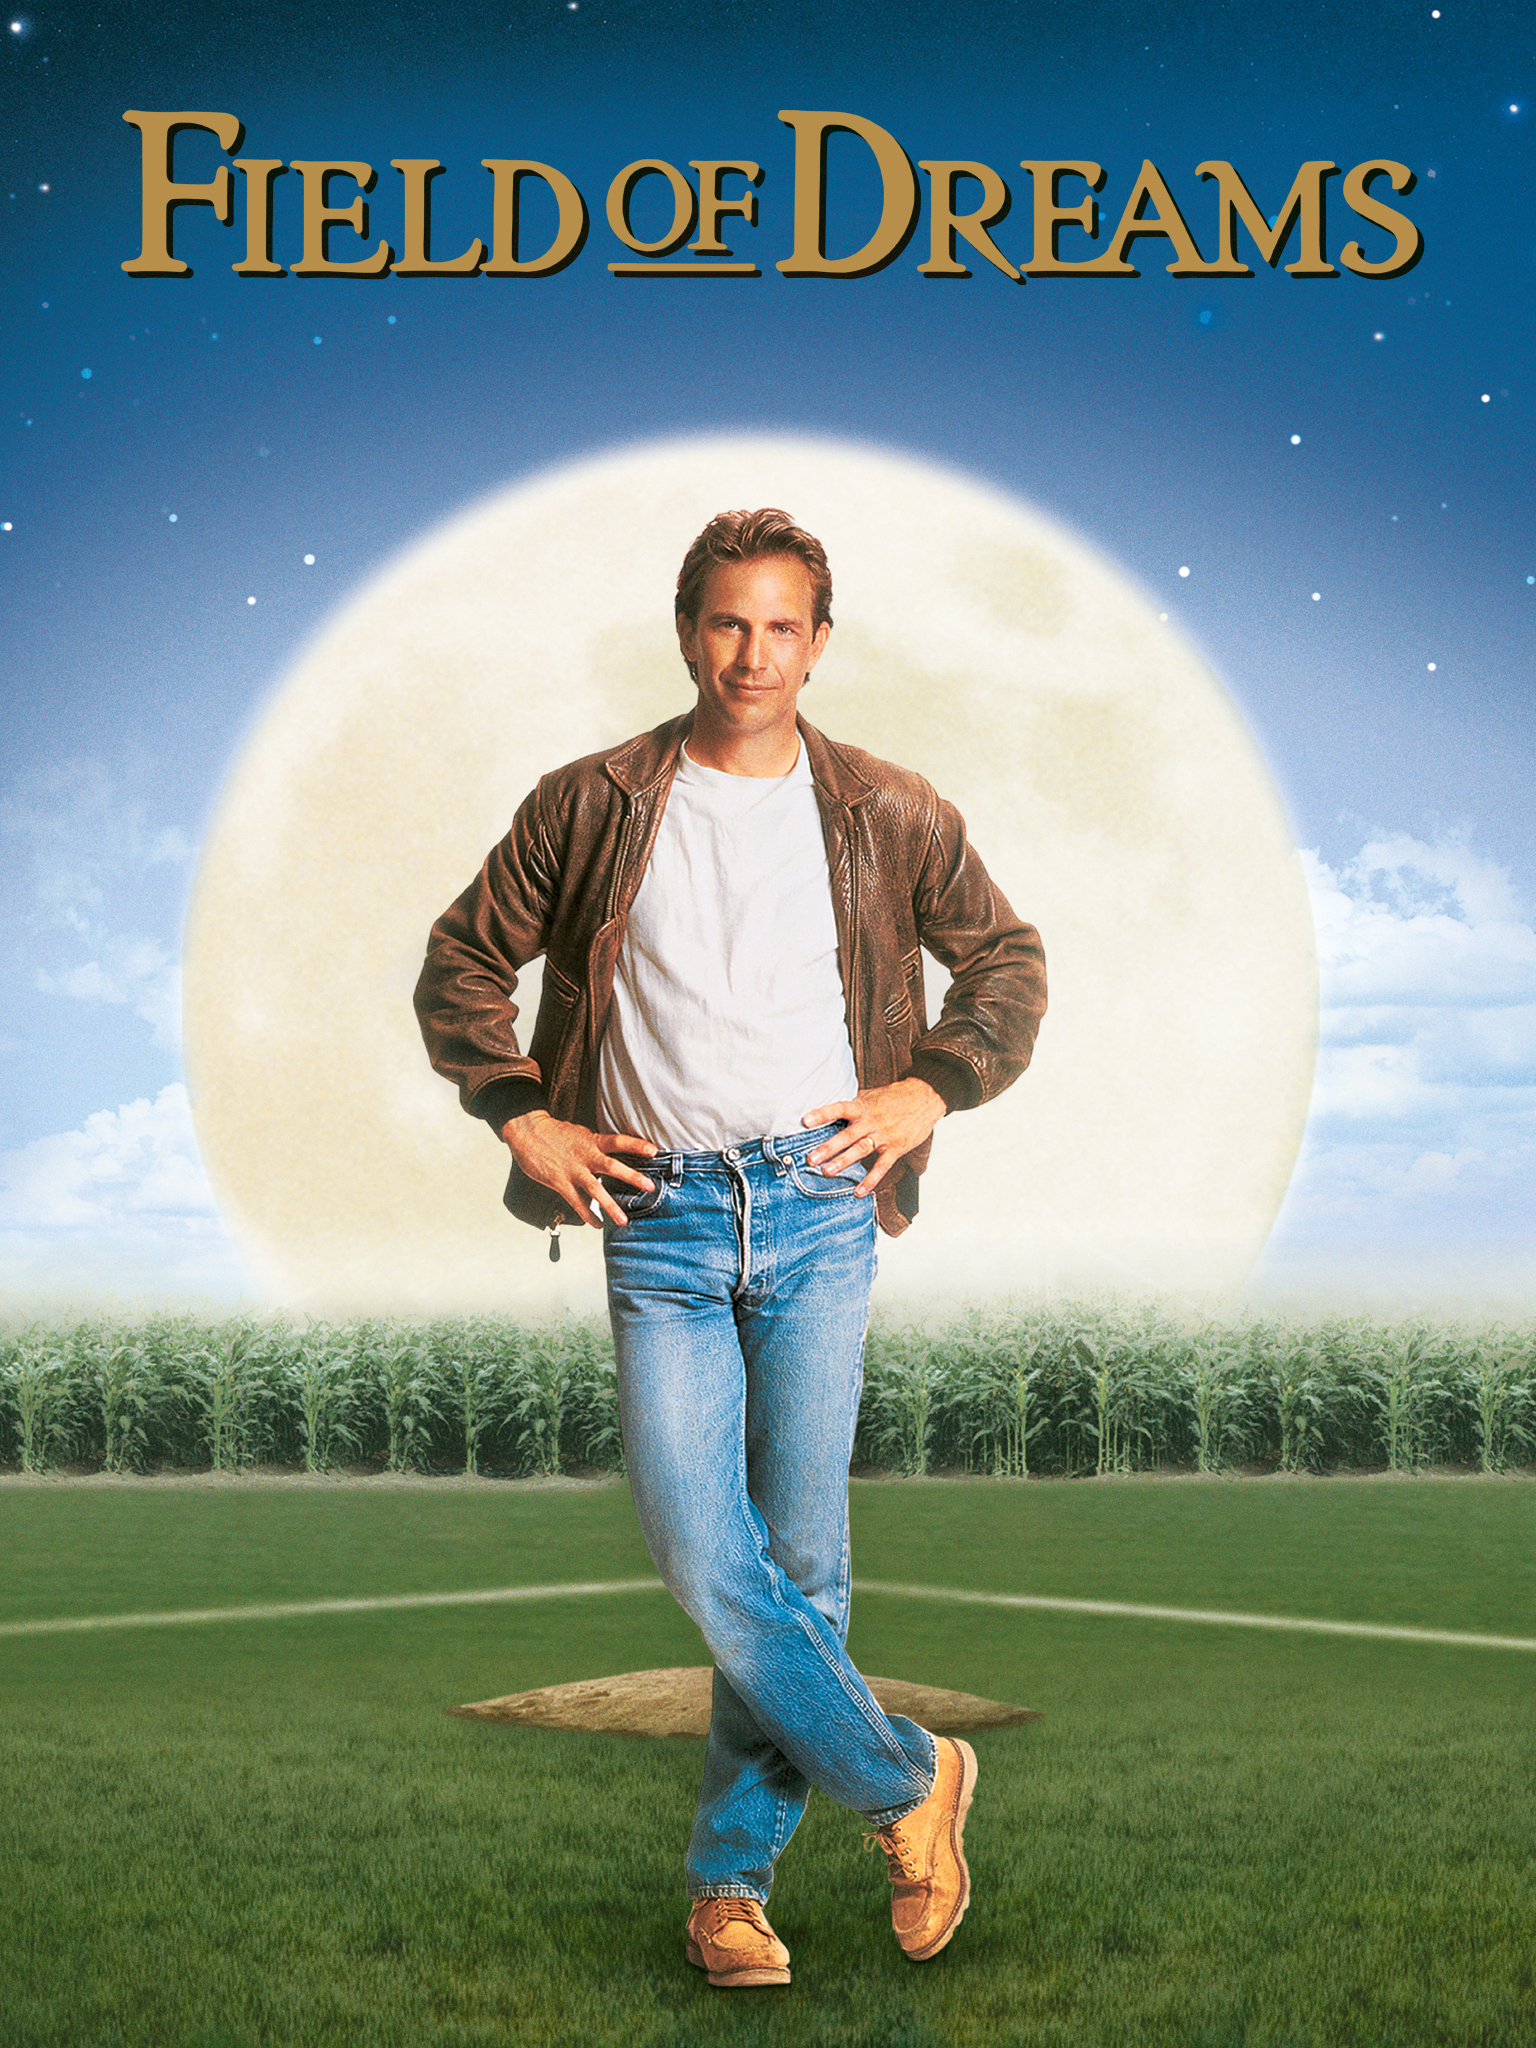 Field of Dreams - Where to Watch and Stream